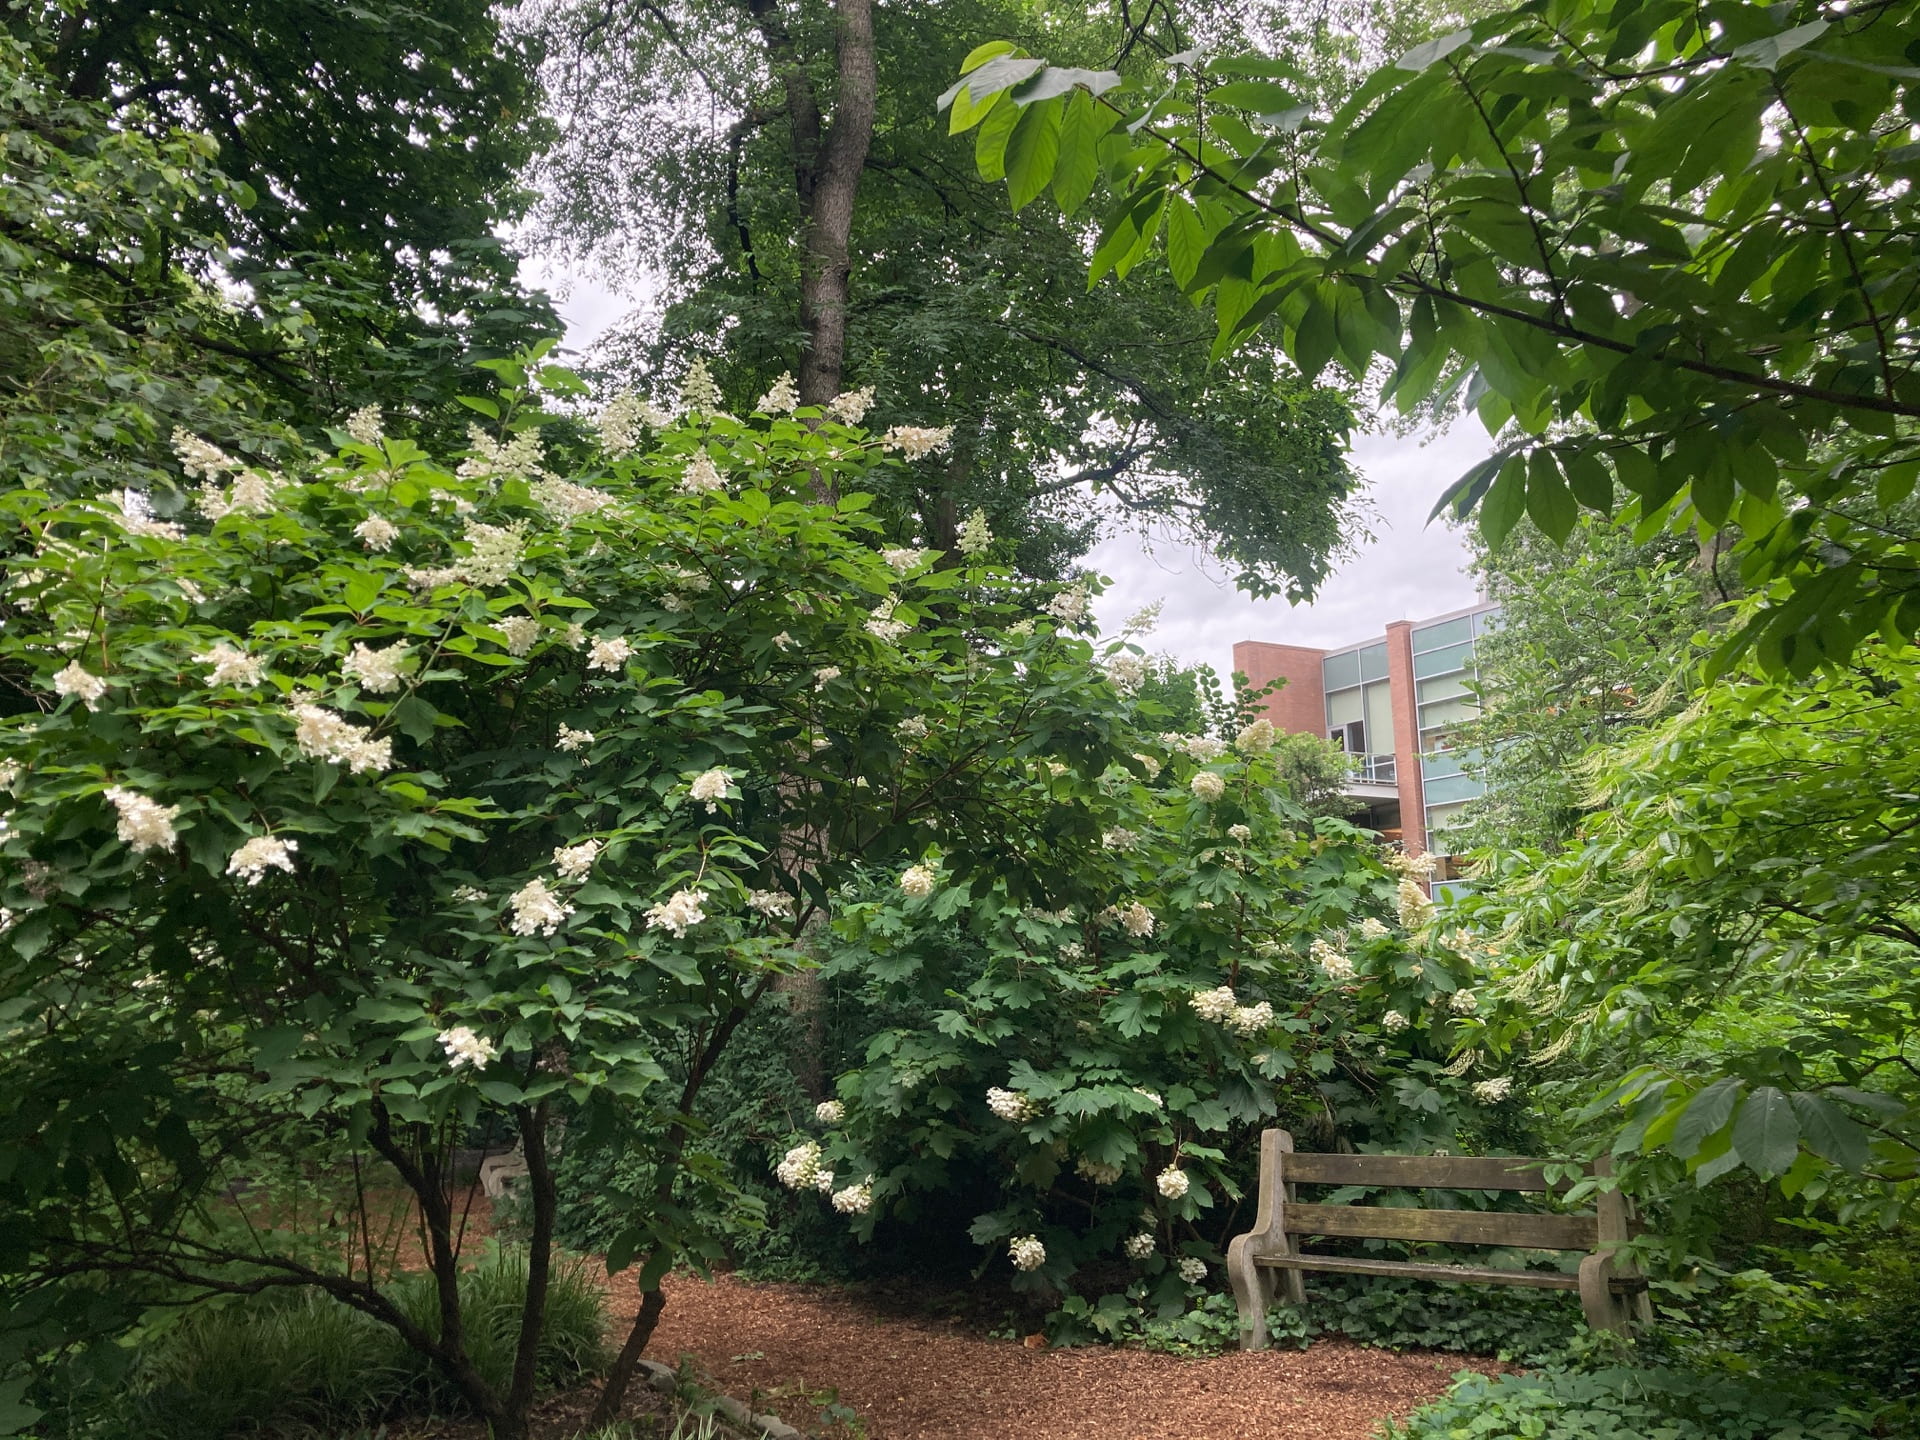 Hydrangea season arrives at the park. Here H. paniculata and H. quercifola frame the pathway.